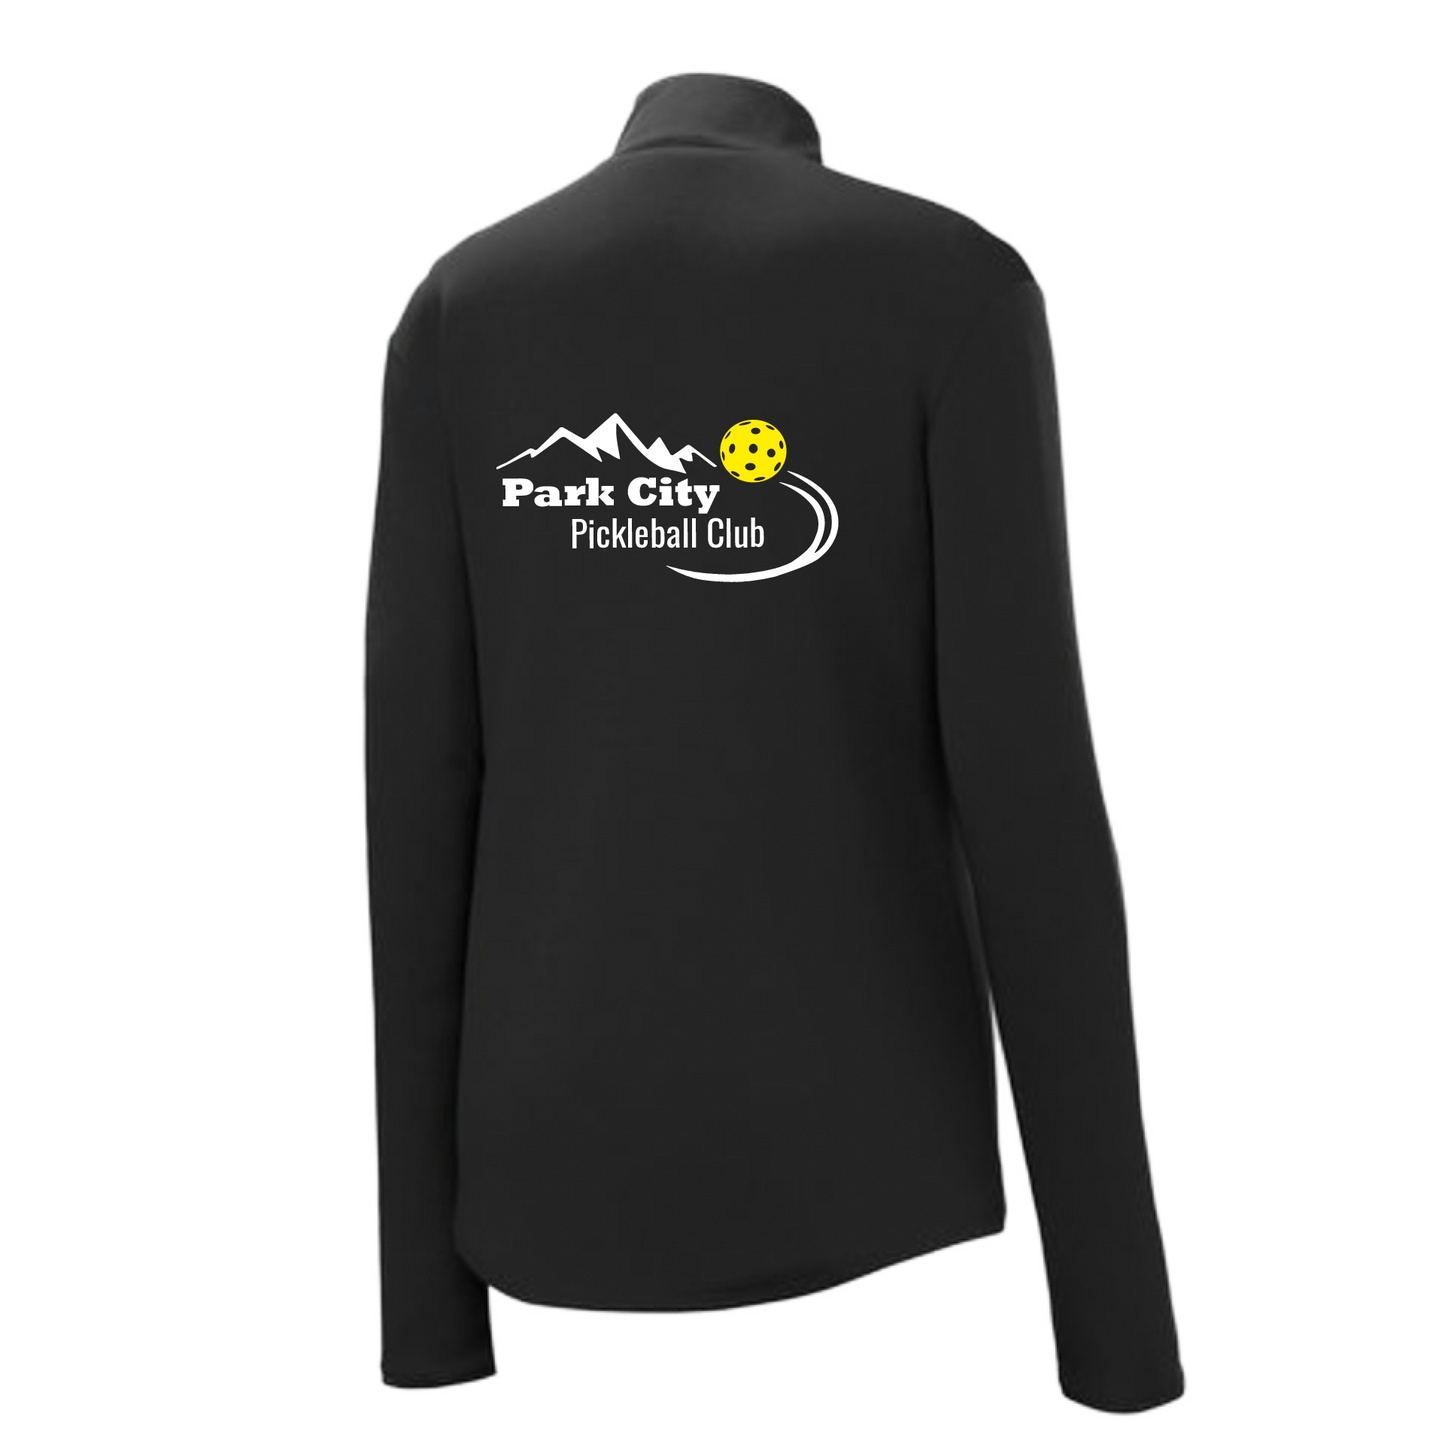 Pickleball Design: Park City Pickleball Club (white words)  Women's 1/4-Zip Pullover: Princess seams and Drop tail hem.  Turn up the volume in this Women's shirt with its perfect mix of softness and attitude. Material is ultra-comfortable with moisture wicking properties and tri-blend softness. PosiCharge technology locks in color. Highly breathable and lightweight. Versatile enough for wearing year-round.